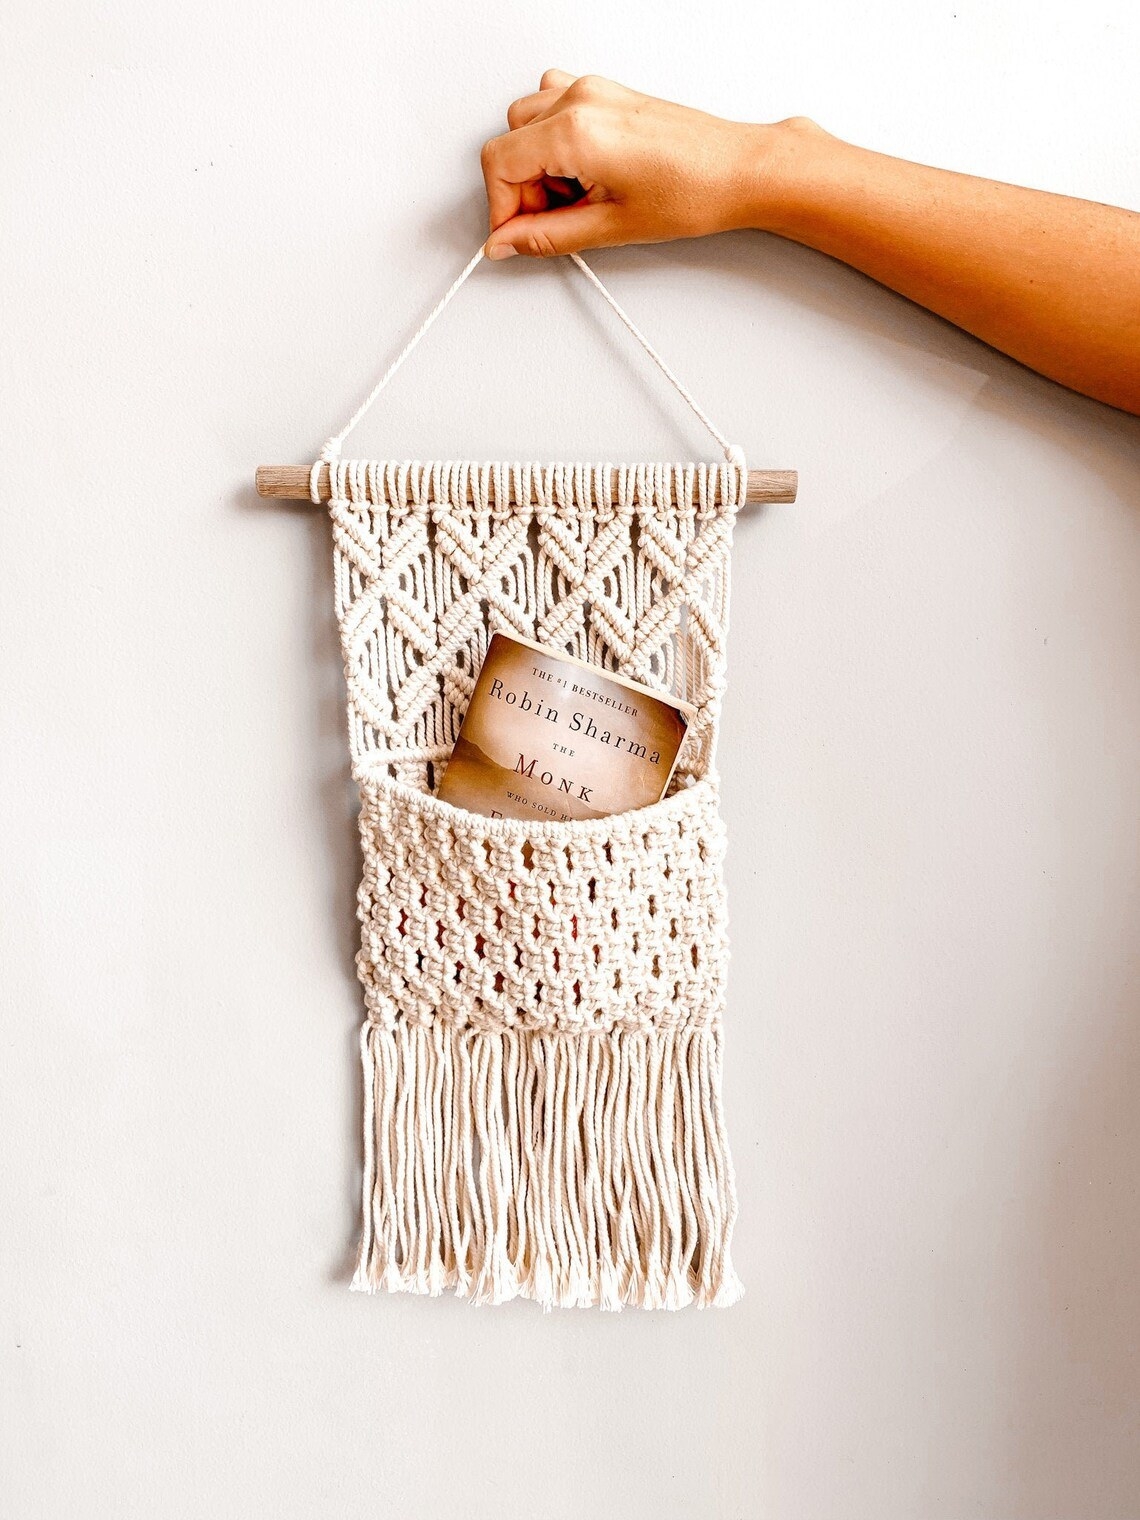 the cream-colored macrame  pouch with a wooden beam holding it at the top for hanging and fringe at the bottom